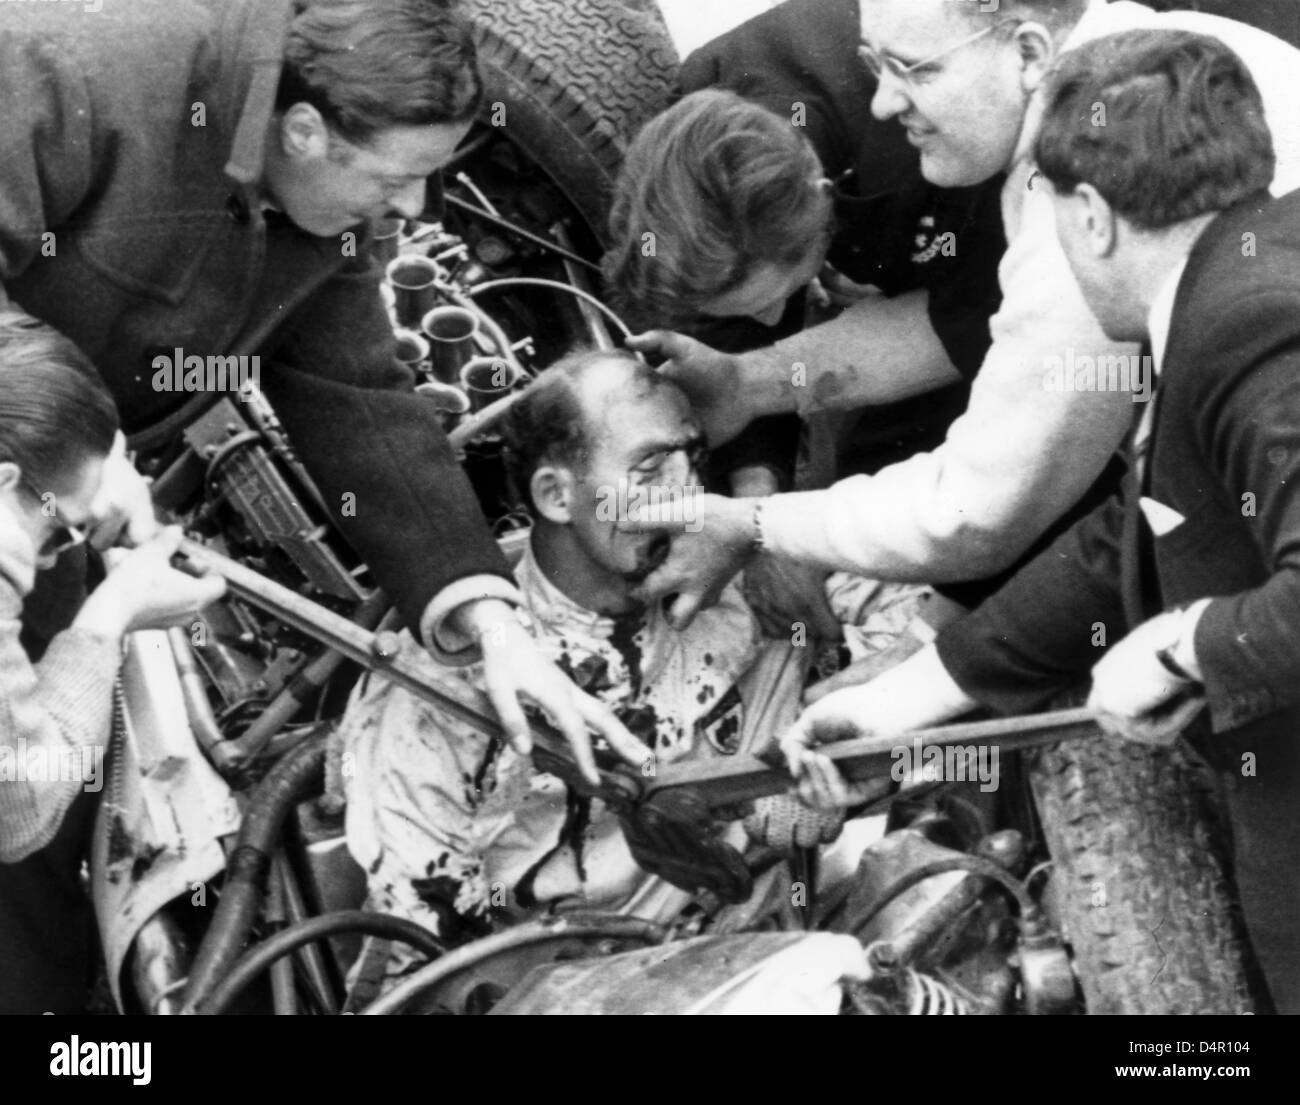 (dpa file) A file picture dated 23 April 1962 captures British motor racing legend Sir Stirling Moss (C) being freed out his Lotus Climax after crashing with 160 kph in Goodwood, UK. Sir Stirling Moss will celebrate his 80th birthday on 16 September 2009. Photo: Harry Melchert Stock Photo